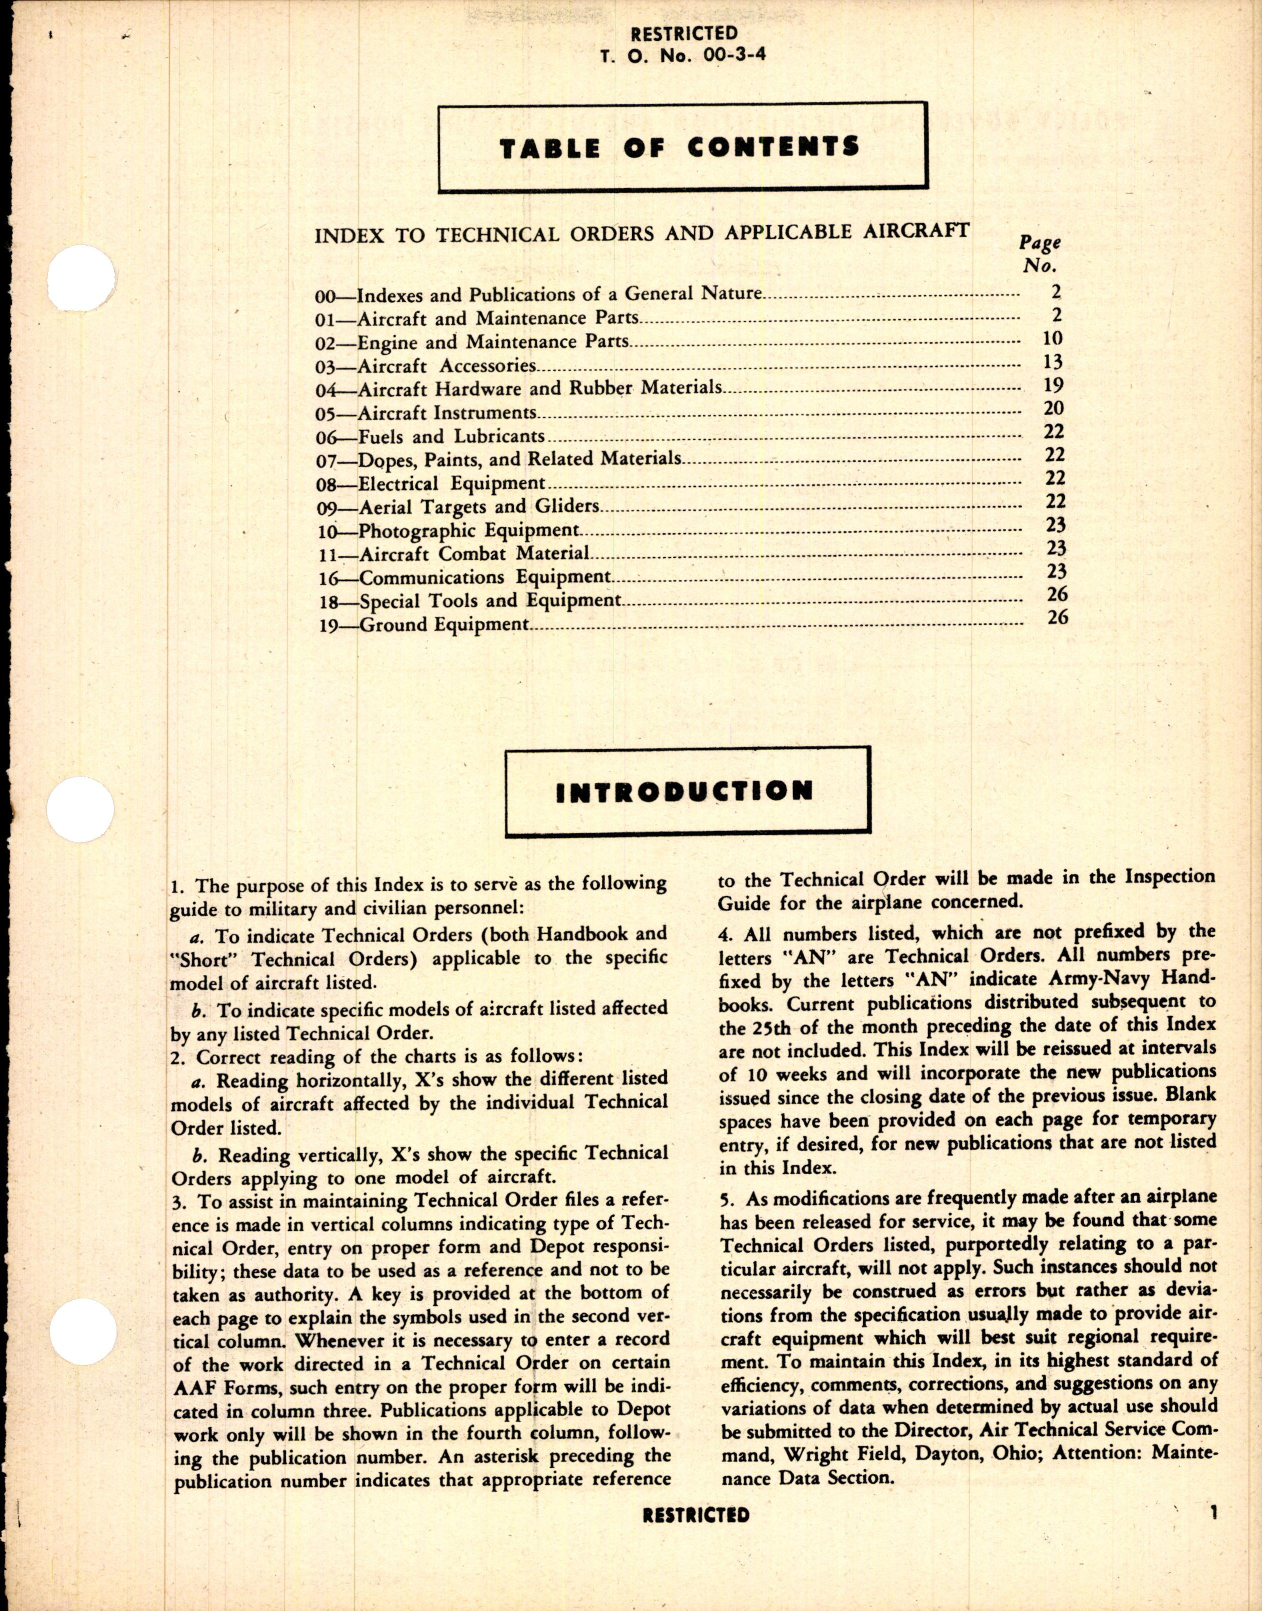 Sample page 3 from AirCorps Library document: Index for Transport Aircraft (Cargo and Personnel)